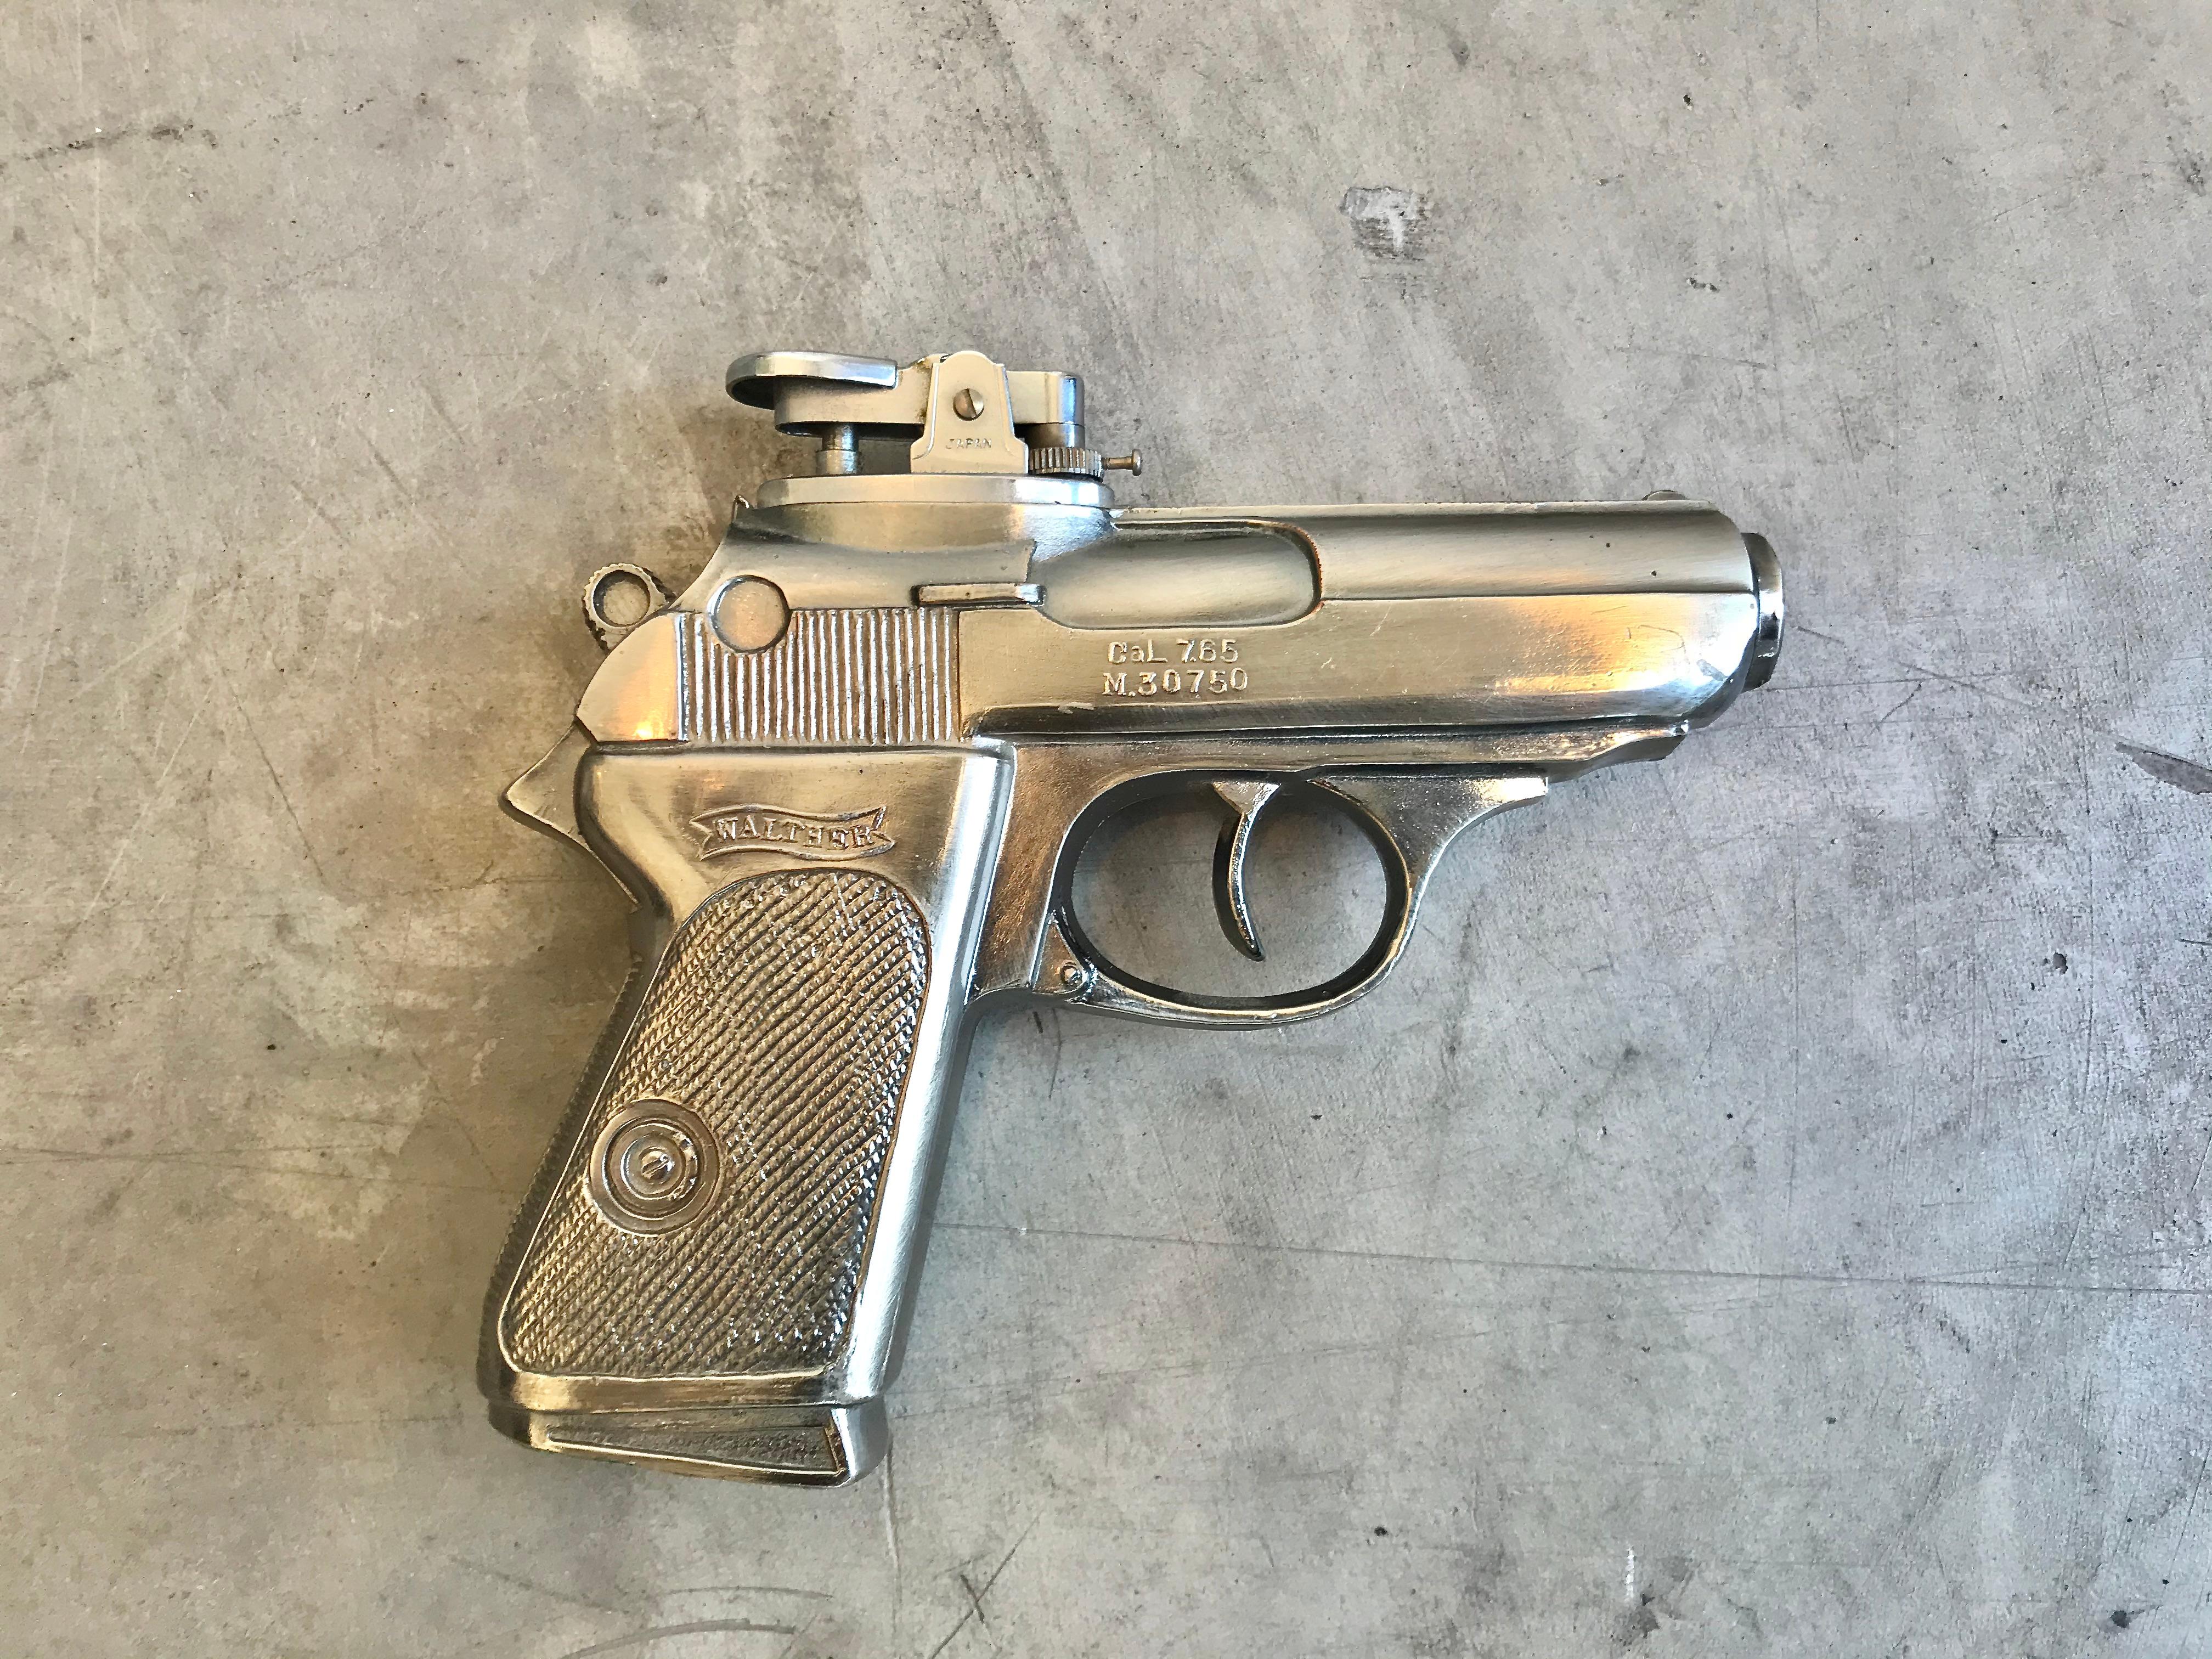 Cool vintage table lighter in the shape of a handgun. Handgun is a Walther-PPK model. Same gun used by James Bond. Made of metal. Made in Japan by Westland Co as seen on original sticker. Good working condition. Great object.

 